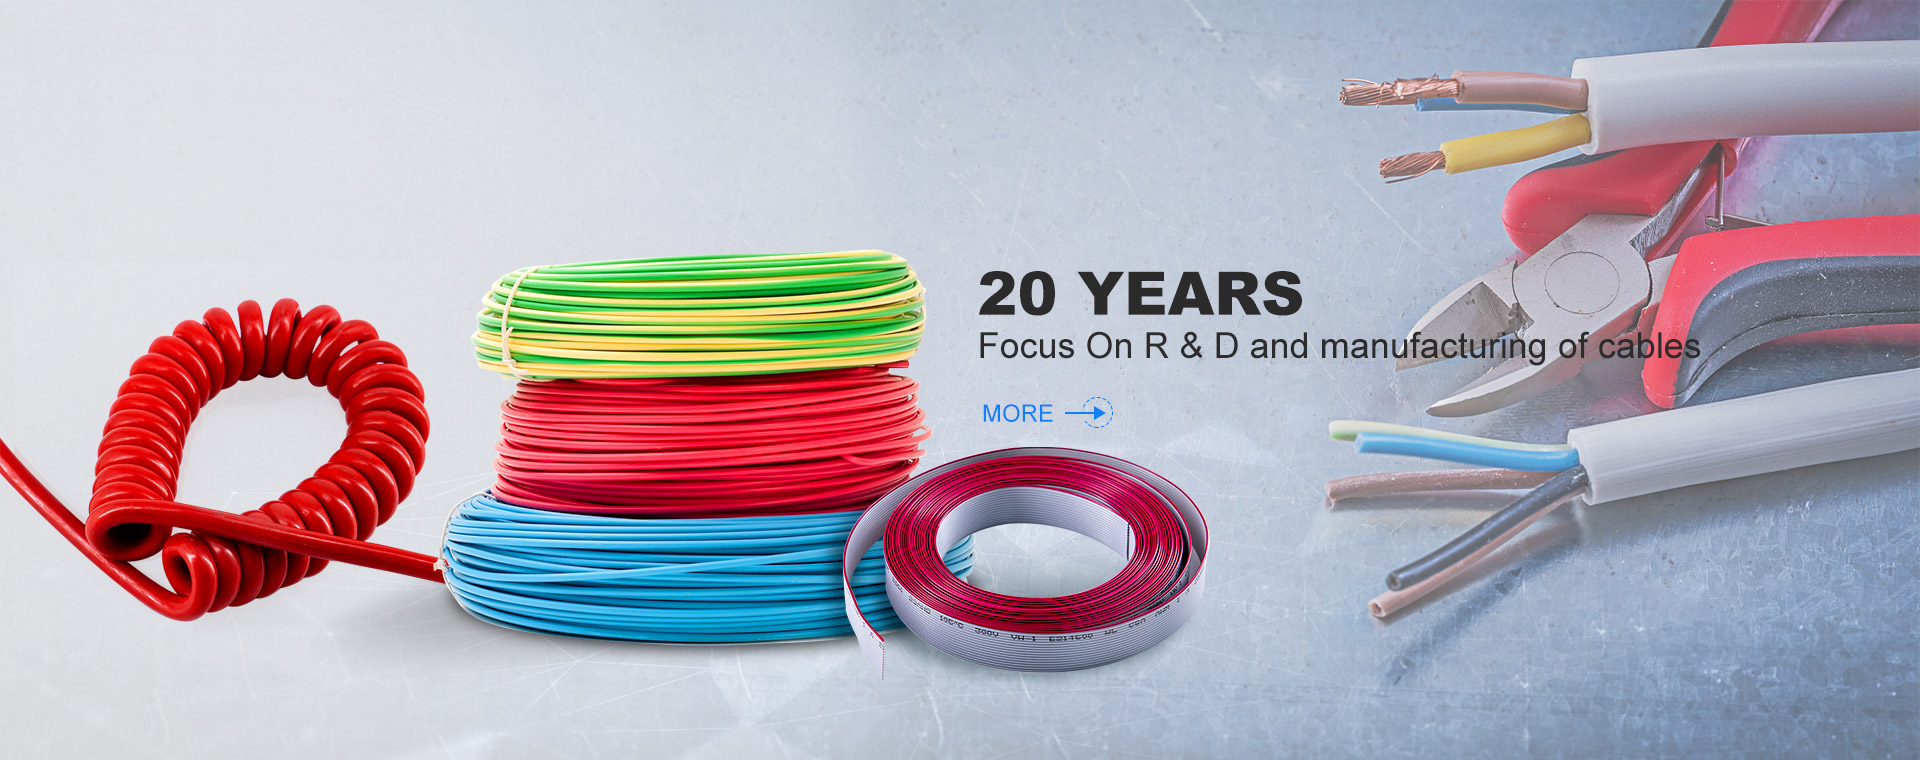 20 YEARS  Focus On R & D and manufacturing of cables